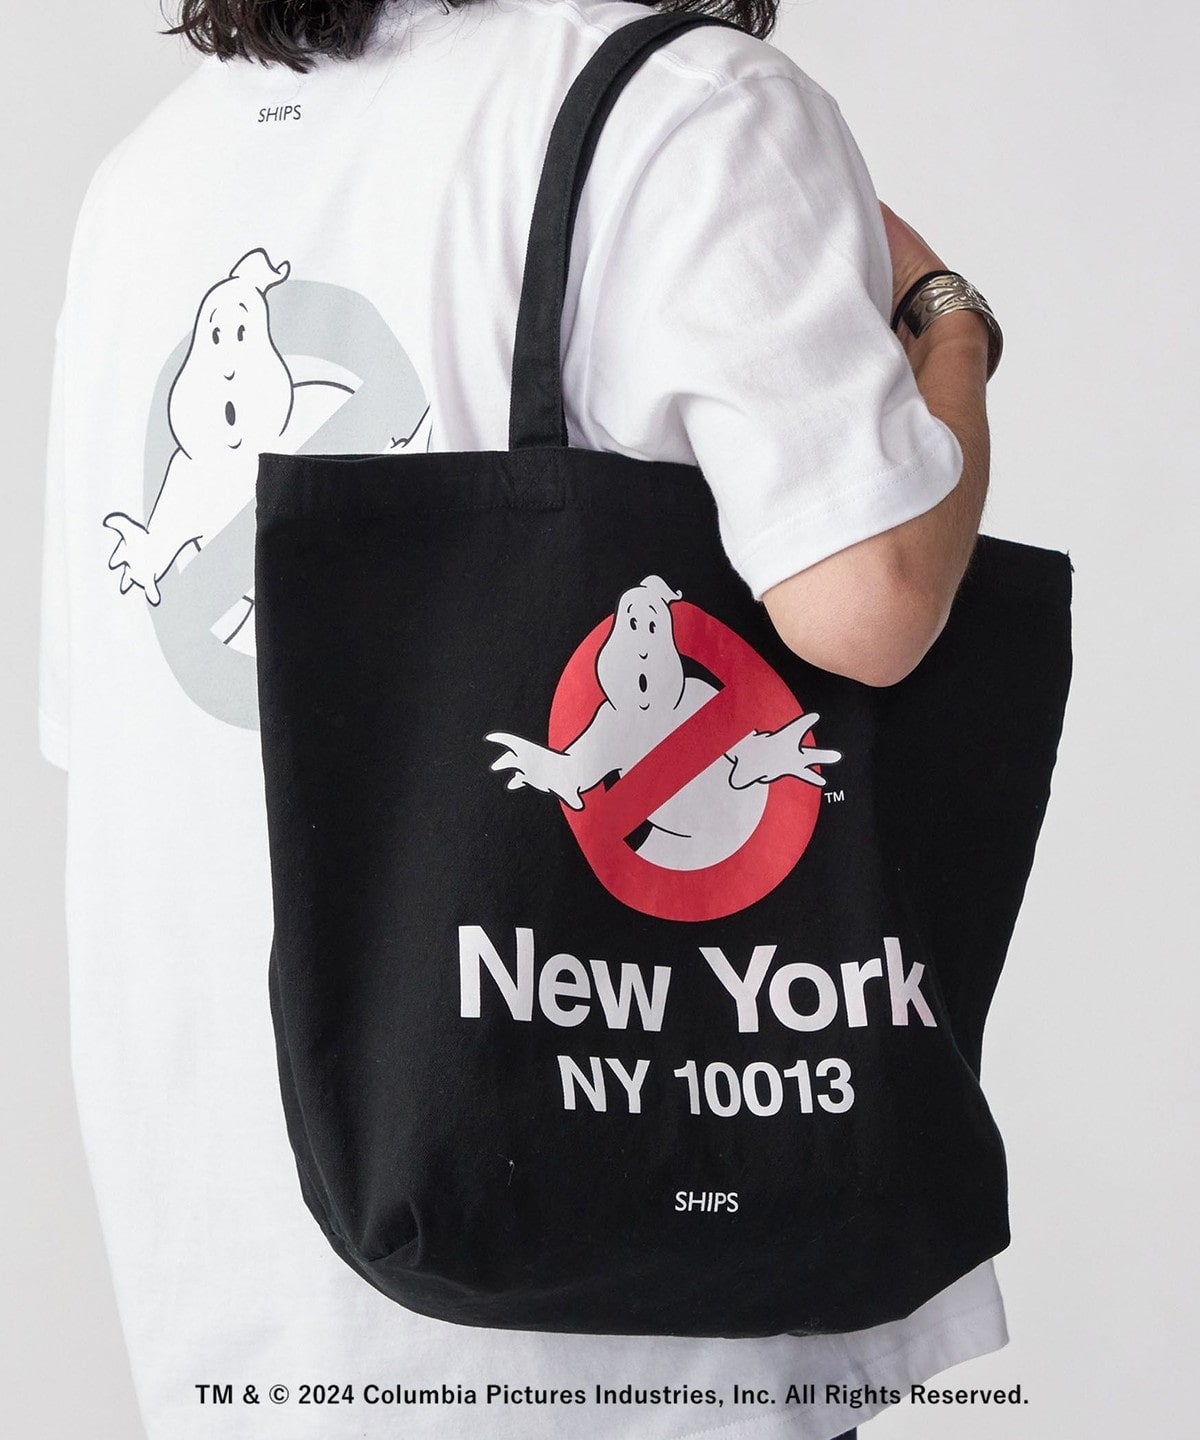 SHIPS: GHOSTBUSTERS NEW YORK TOTE: バッグ SHIPS 公式サイト｜株式